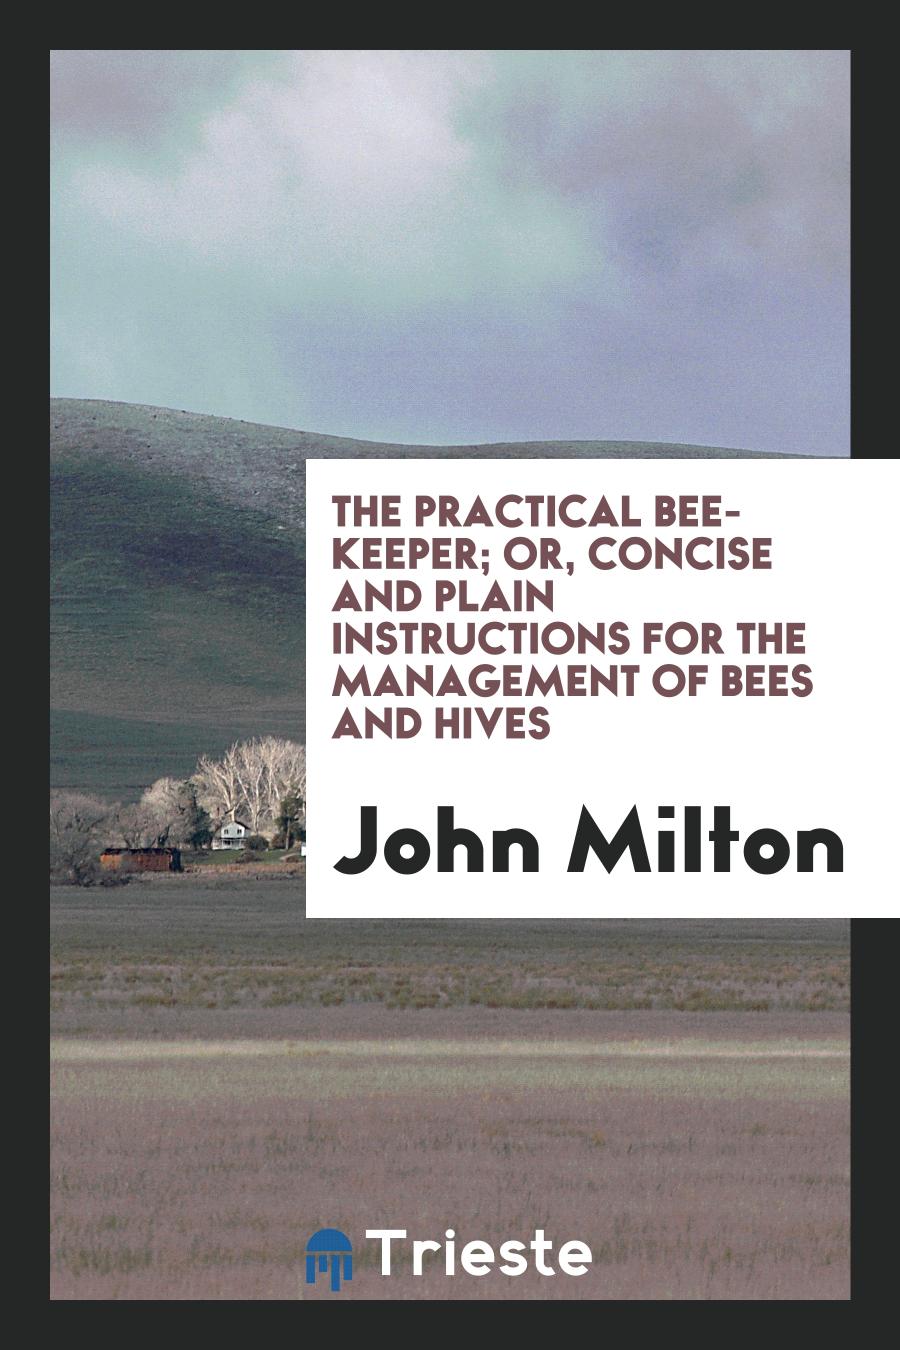 The Practical Bee-Keeper; Or, Concise and Plain Instructions for the Management of Bees and Hives